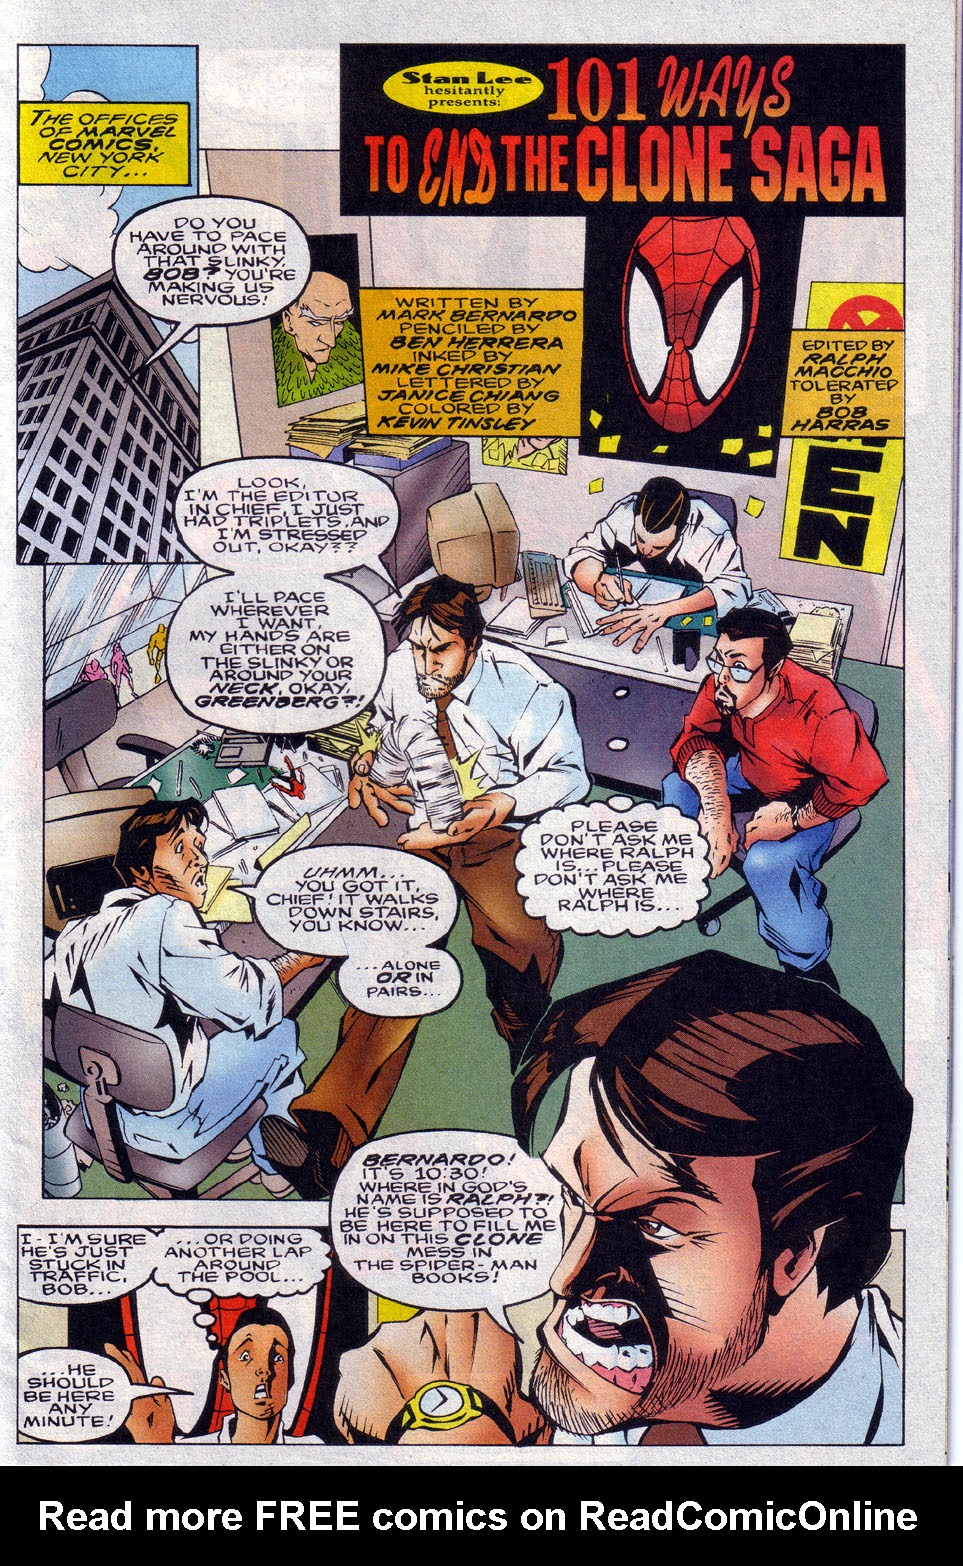 Read online 101 Ways to End the Clone Saga comic -  Issue #101 Ways to End the Clone Saga Full - 3